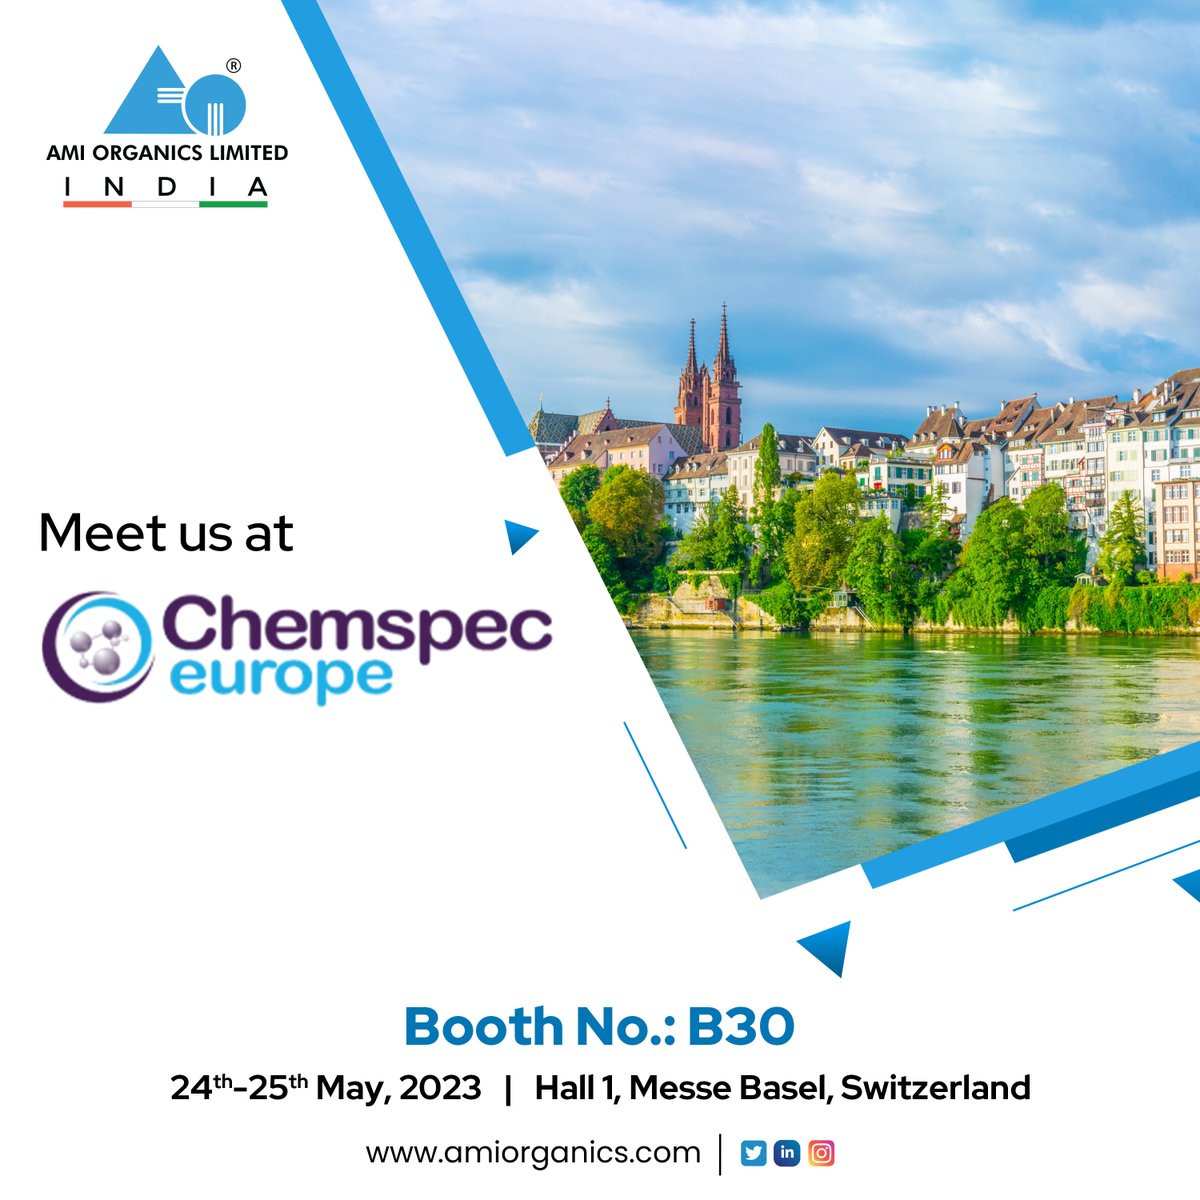 We're excited to share that we will be exhibiting at Chemspec Europe - Int. Exhibition for Fine & Speciality Chemicals from 24 - 25th May 2023 at Messe Basel in Switzerland.

Email us at gaurav@amiorganics.com to set up a meeting in advance.

#SpecialityChemicals #ChemspecEurope